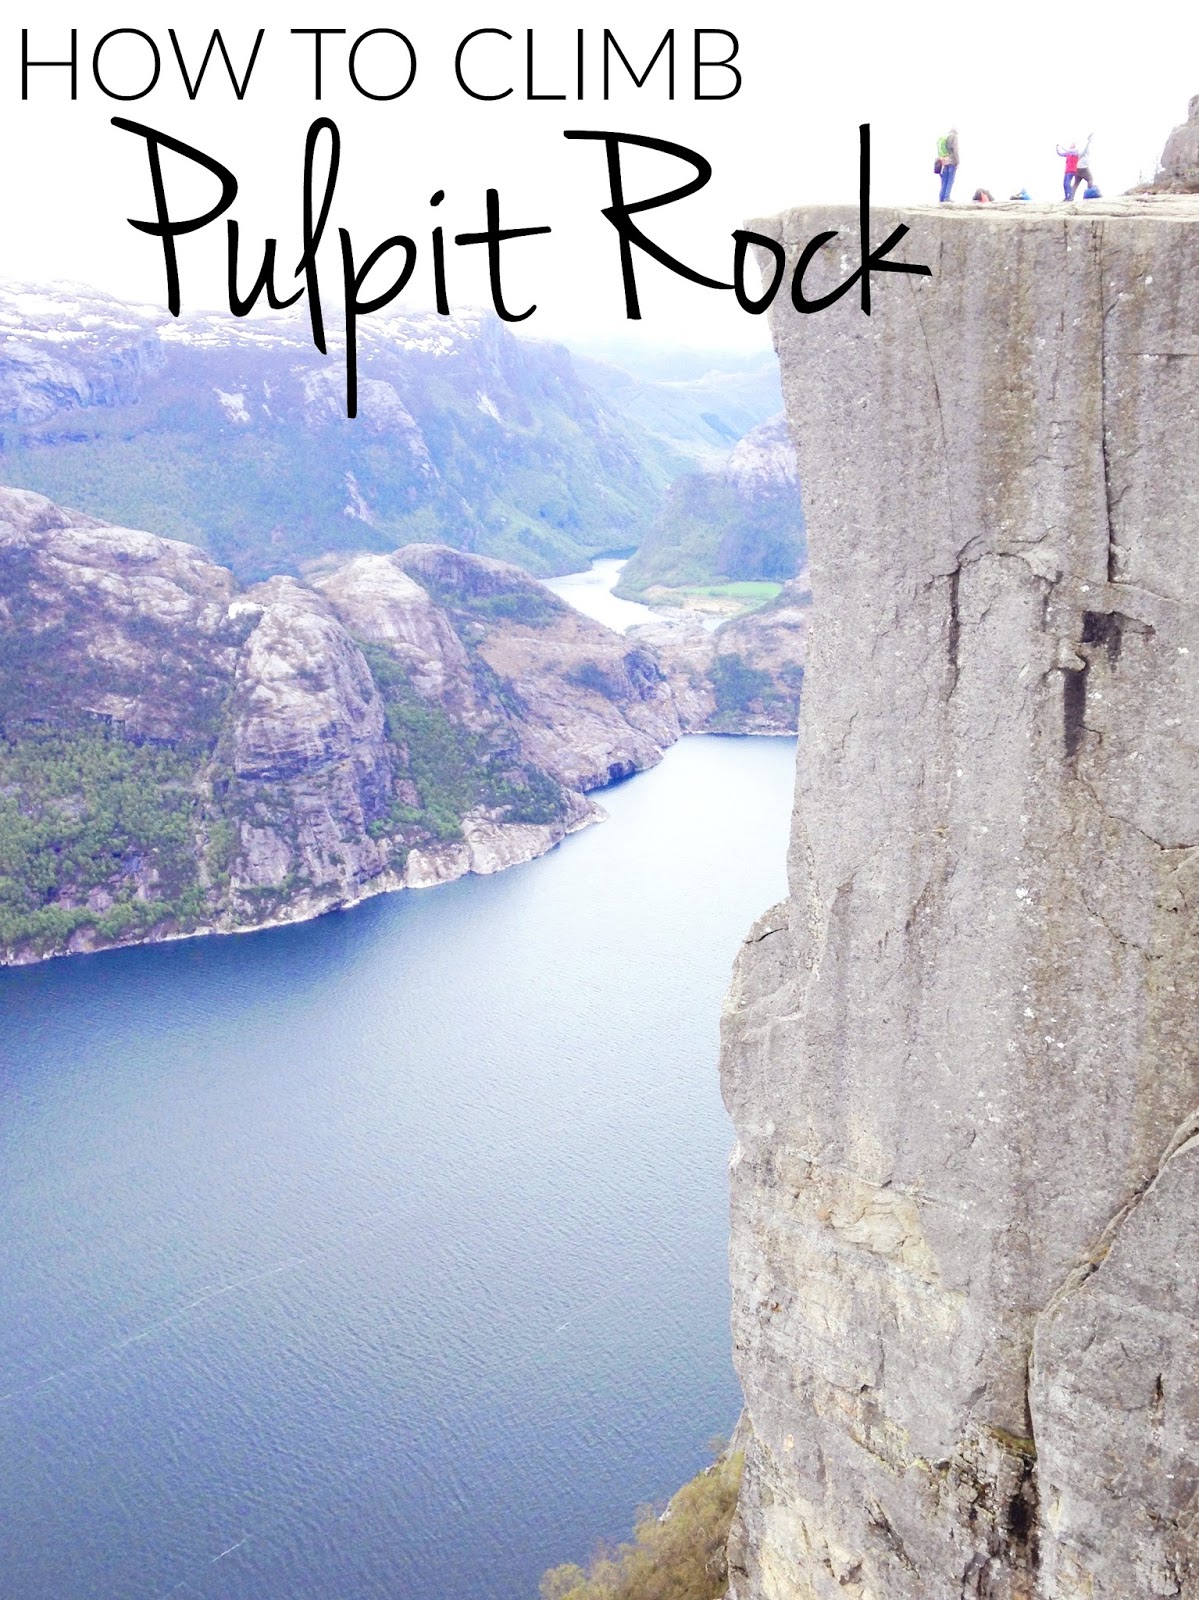 HOW TO CLIMB PULPIT ROCK – ALL YOU NEED TO KNOW